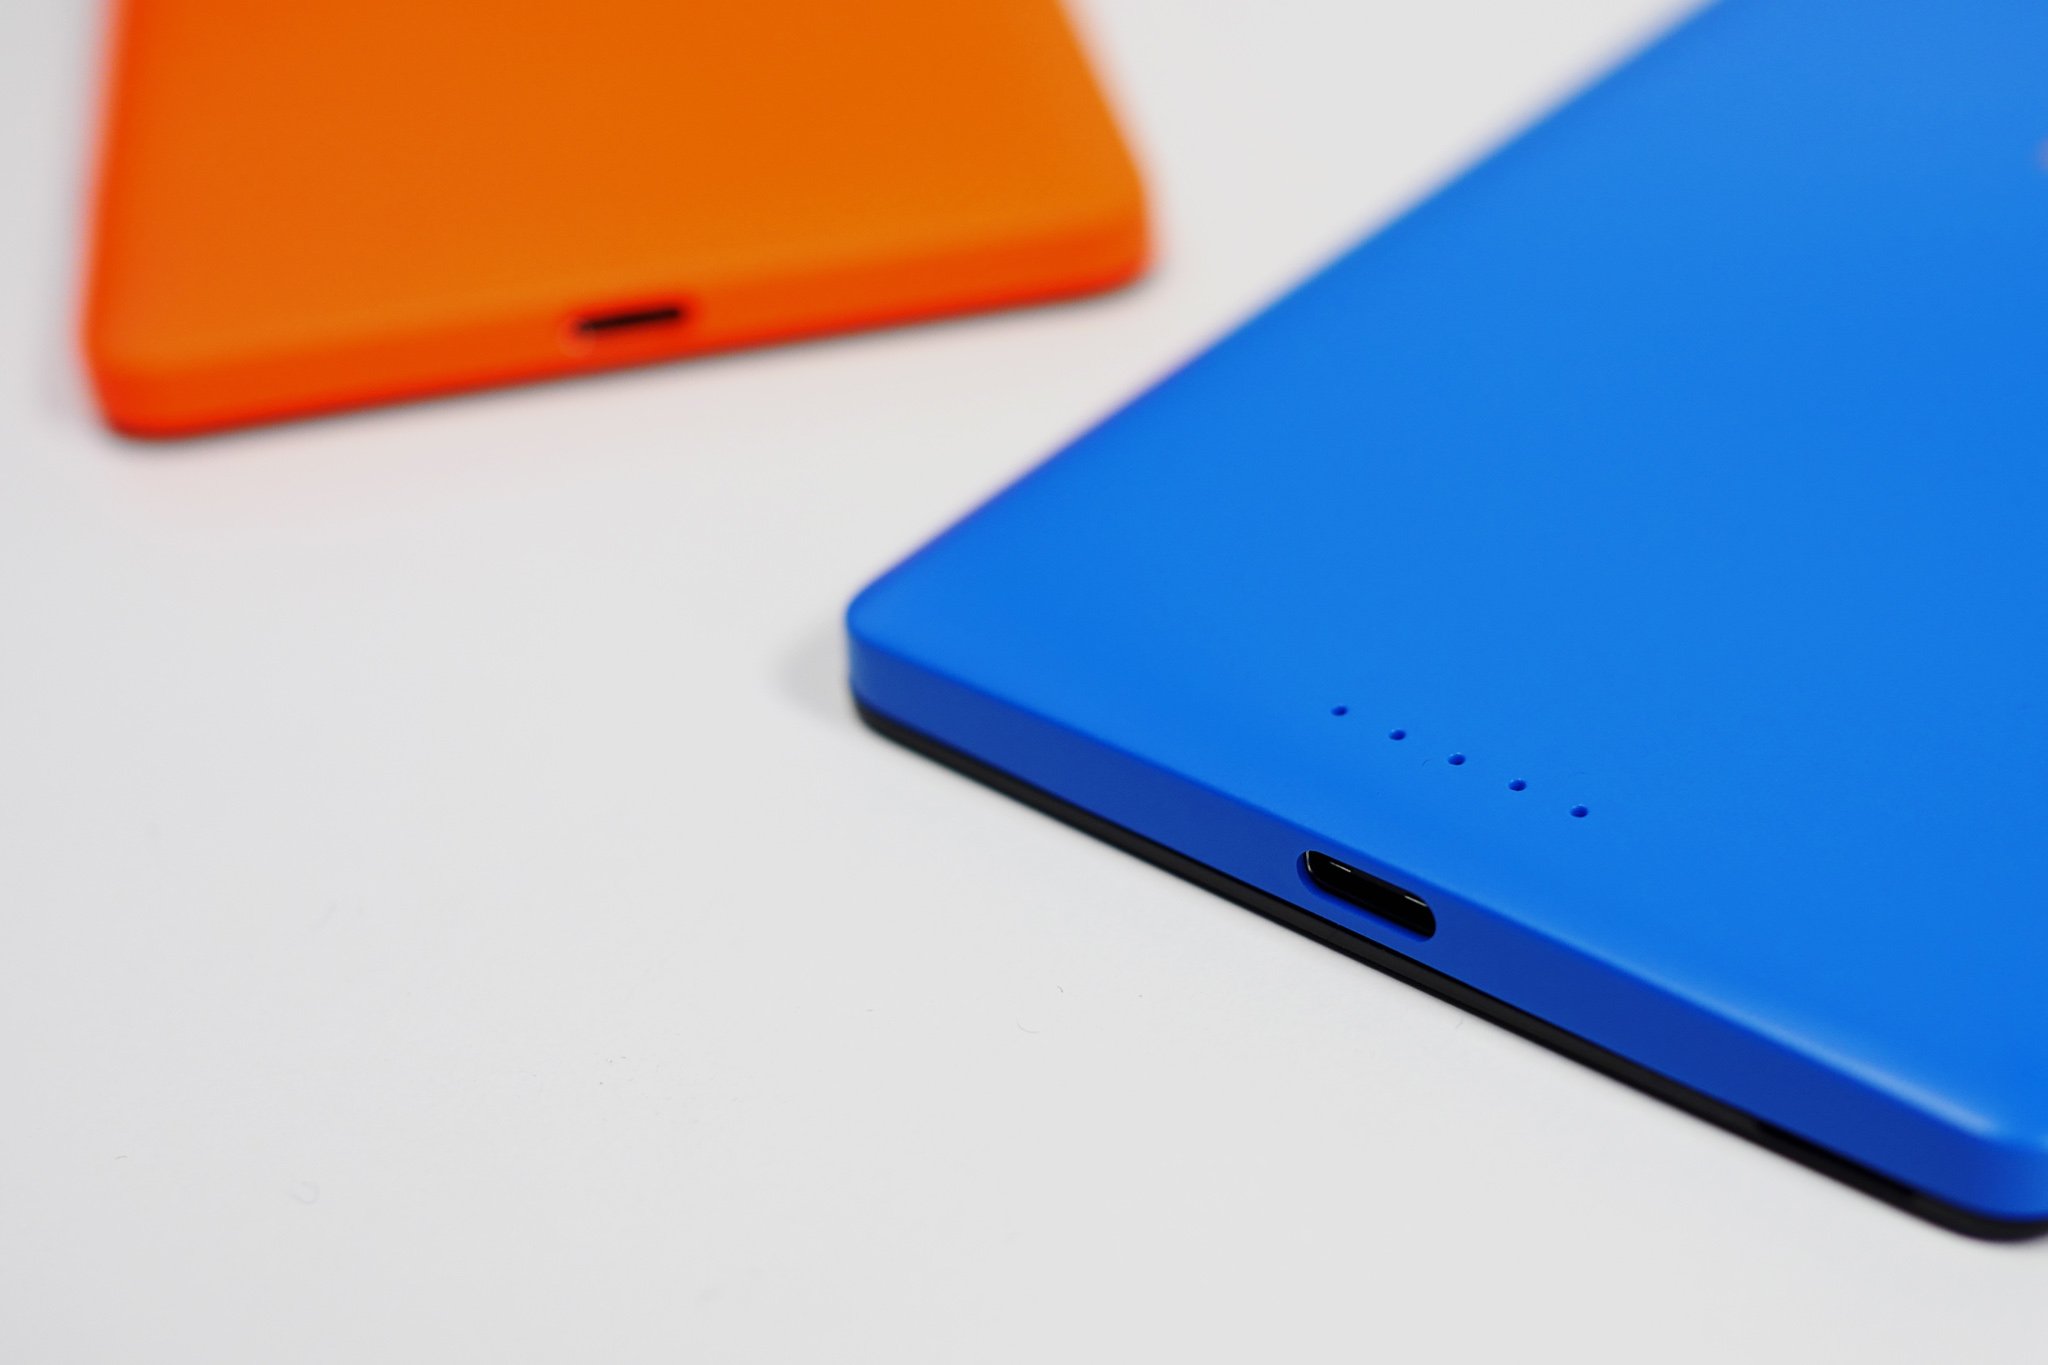 Orange and Blue replacement covers for the Lumia 950 